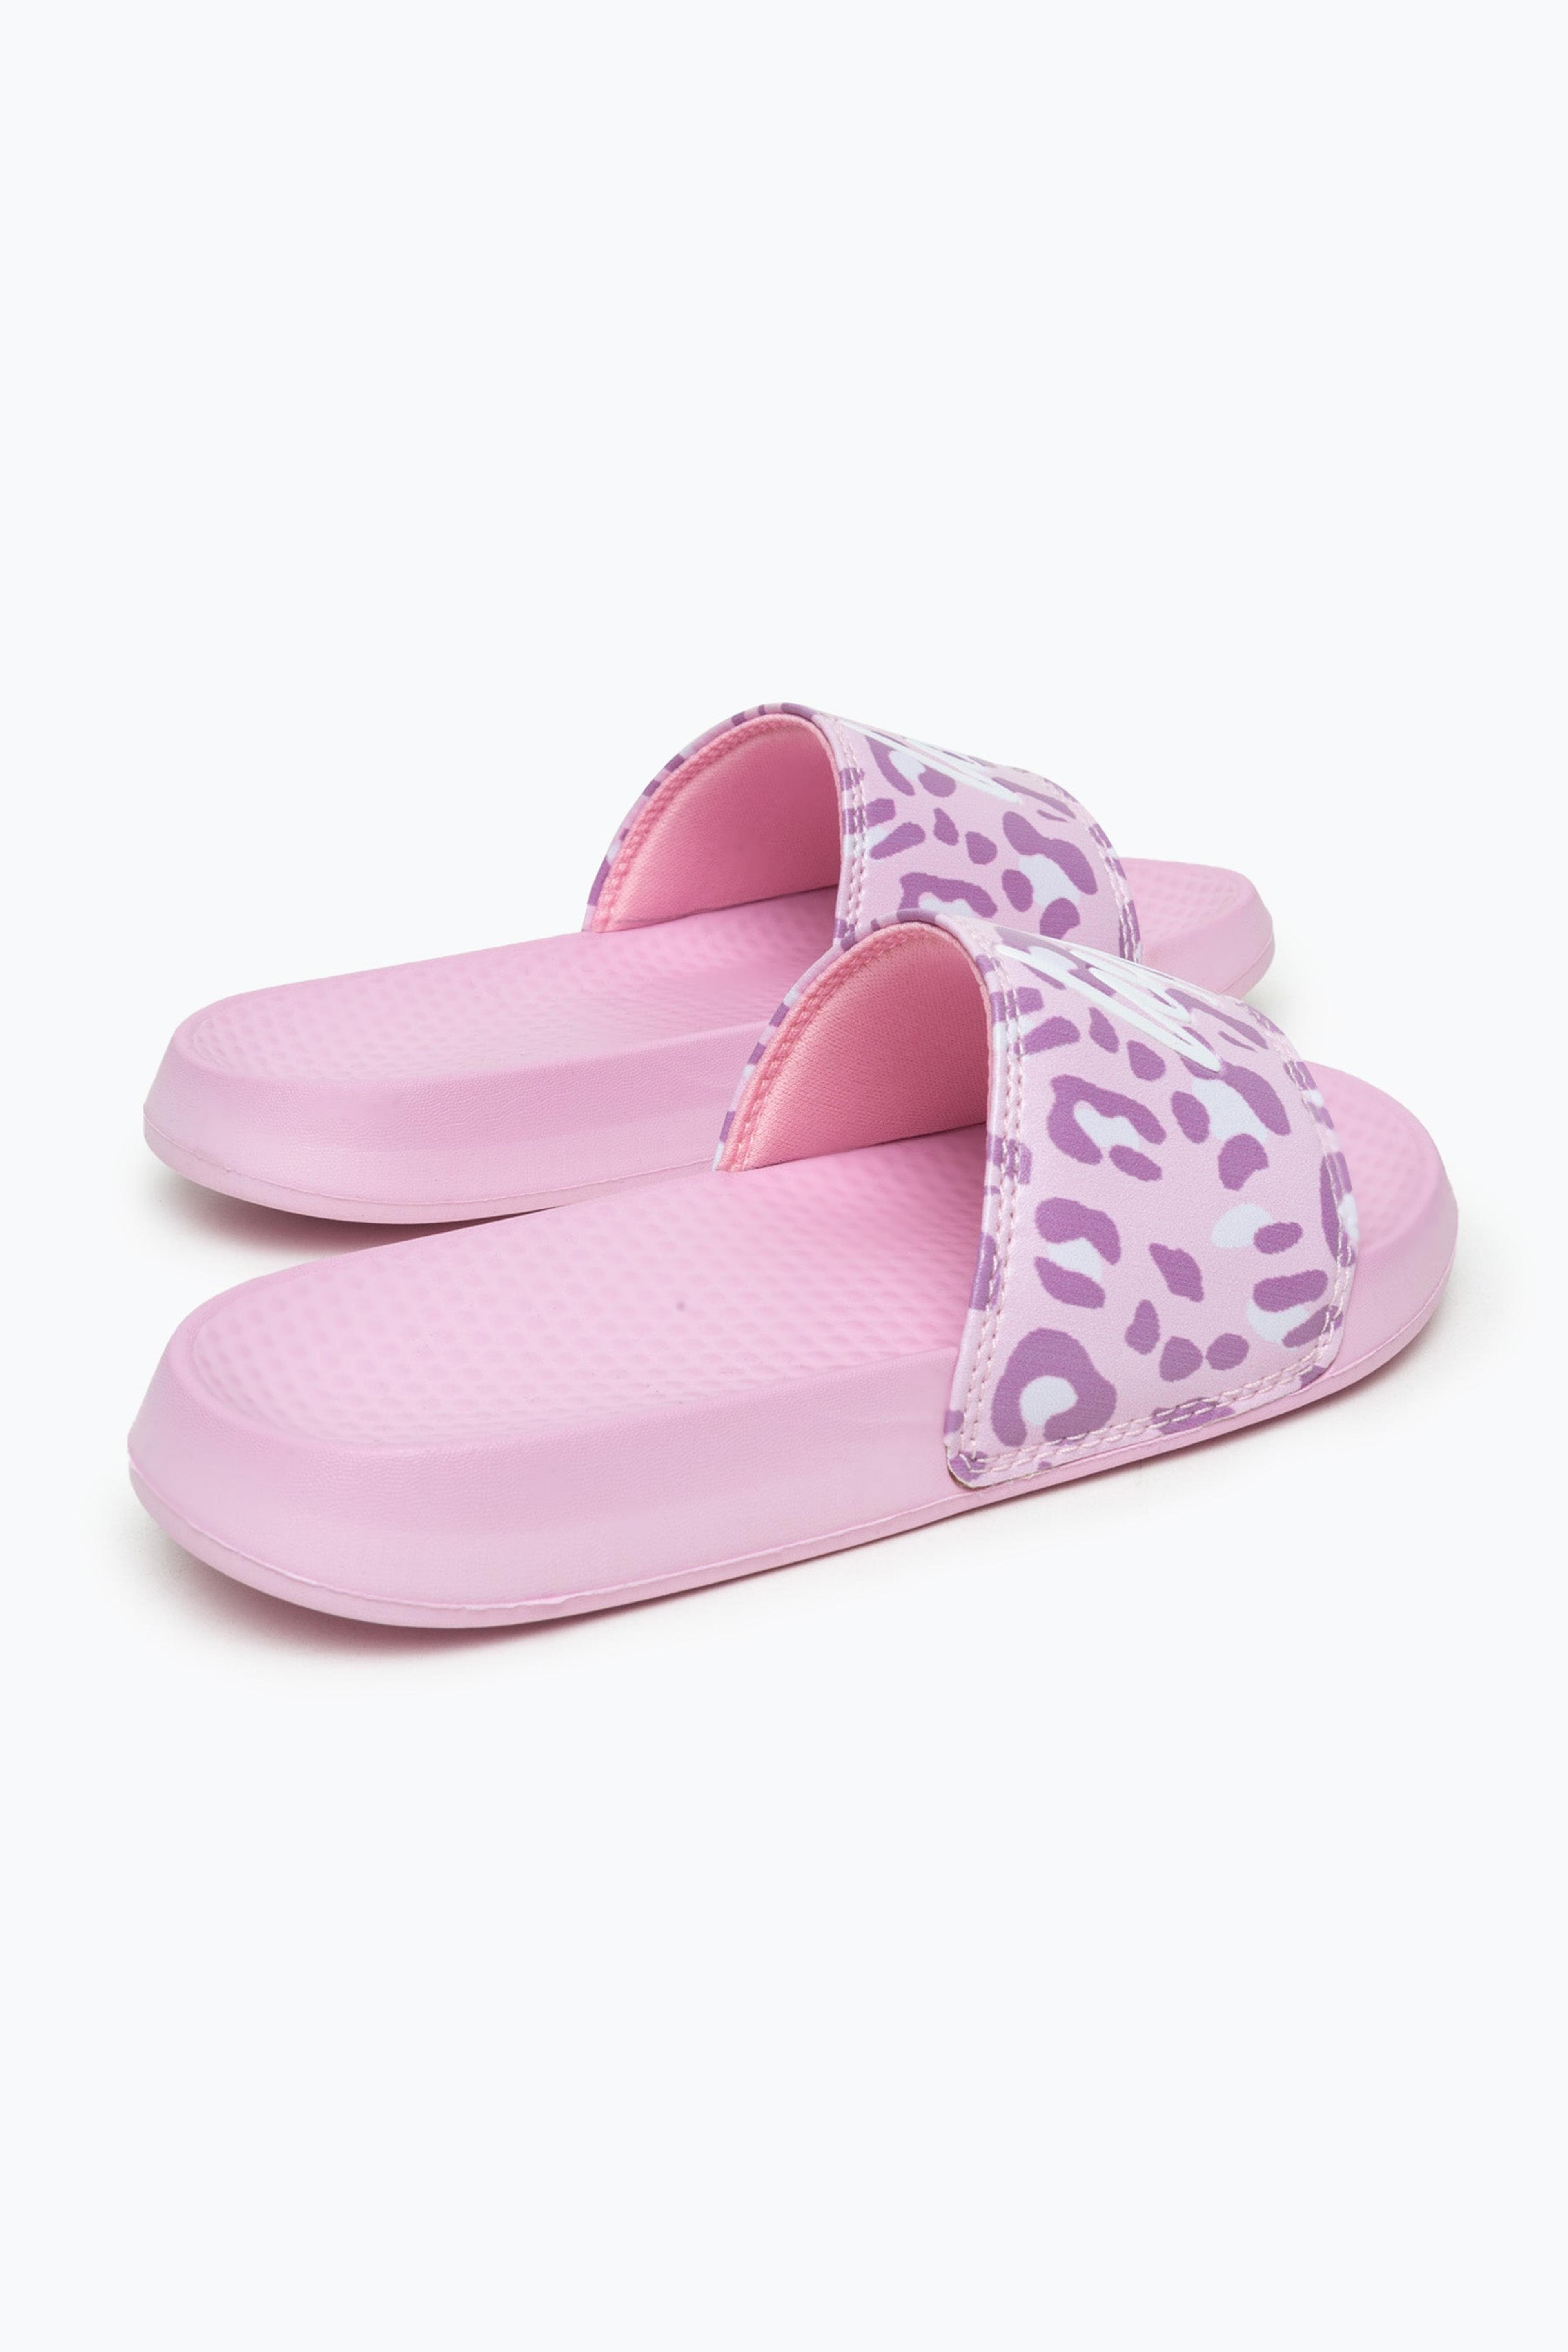 Alternate View 1 of HYPE KIDS UNISEX PINK TONE ON TONE LEOPARD CREST SLIDERS